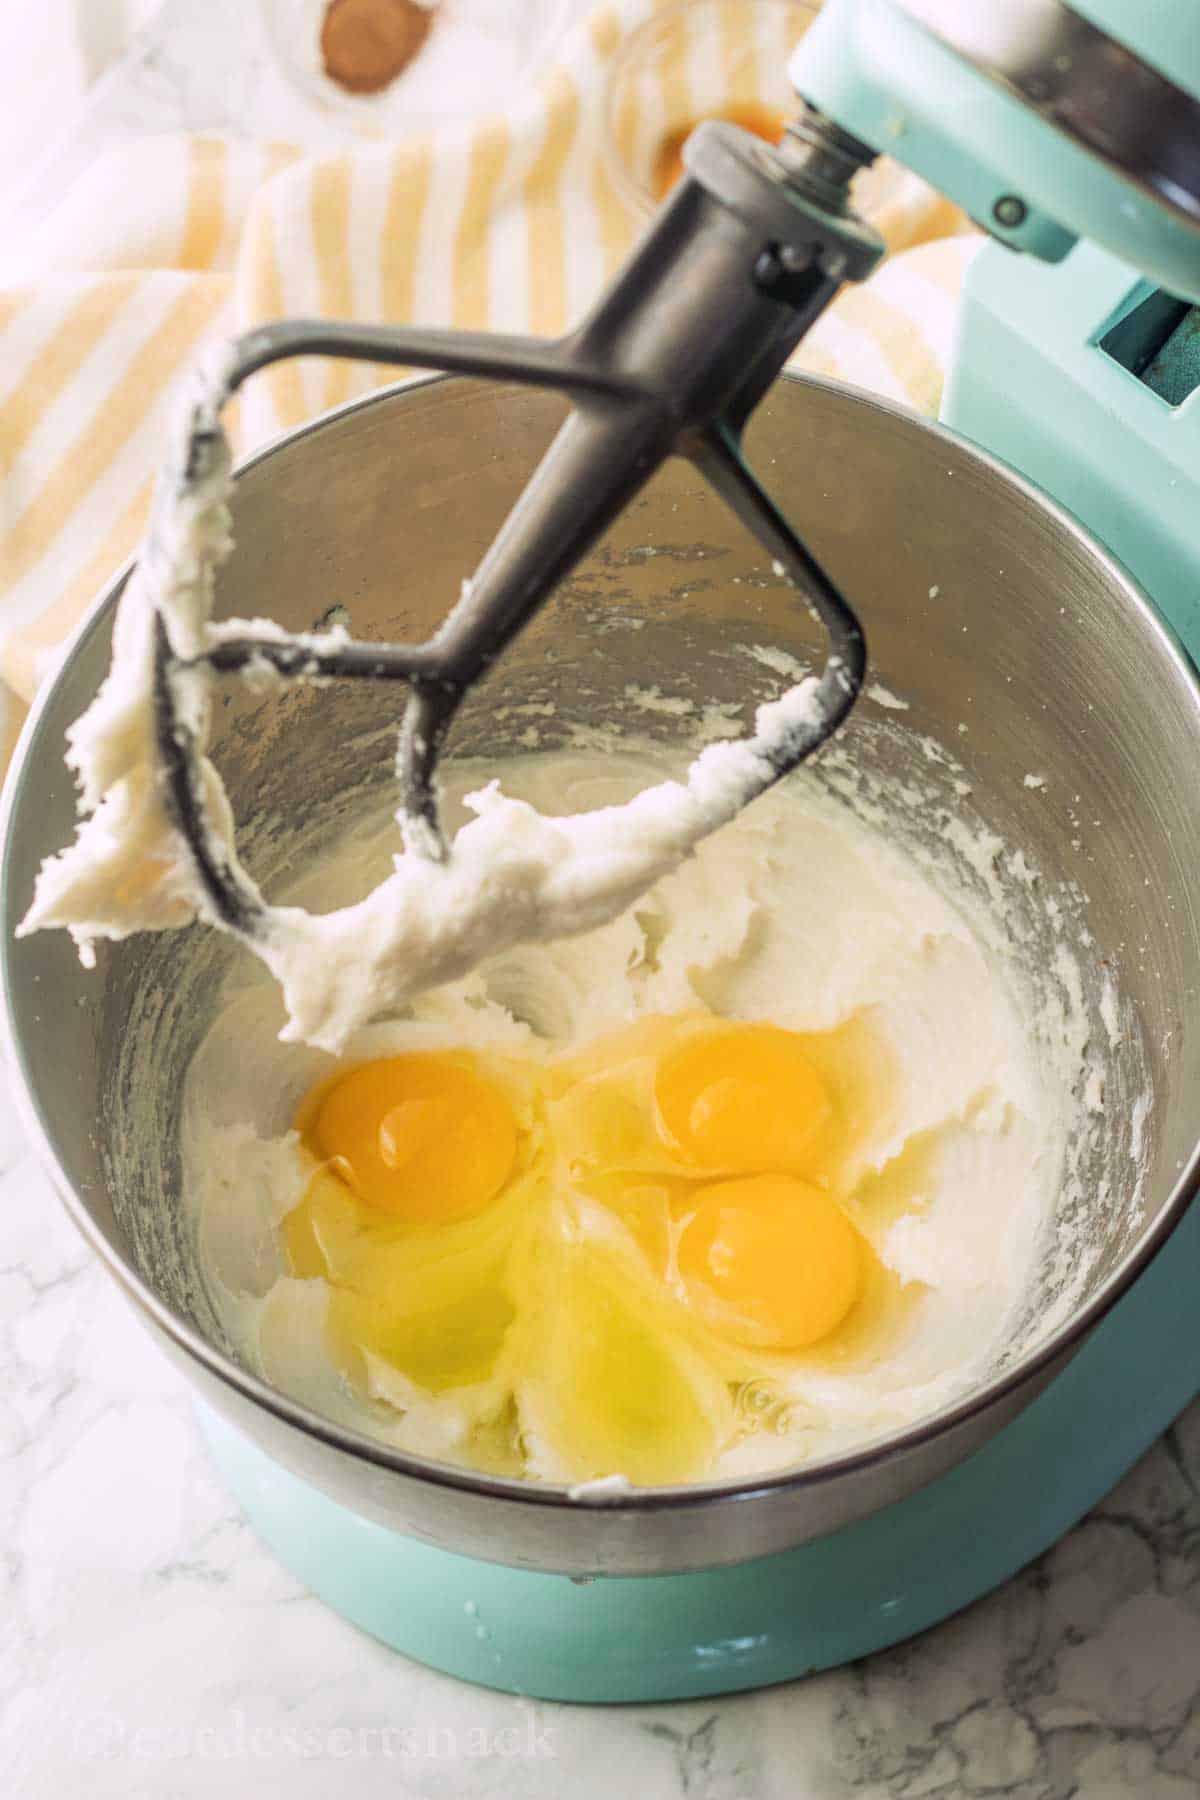 Cream cheese and eggs in mixing bowl with metal mixer paddle above.